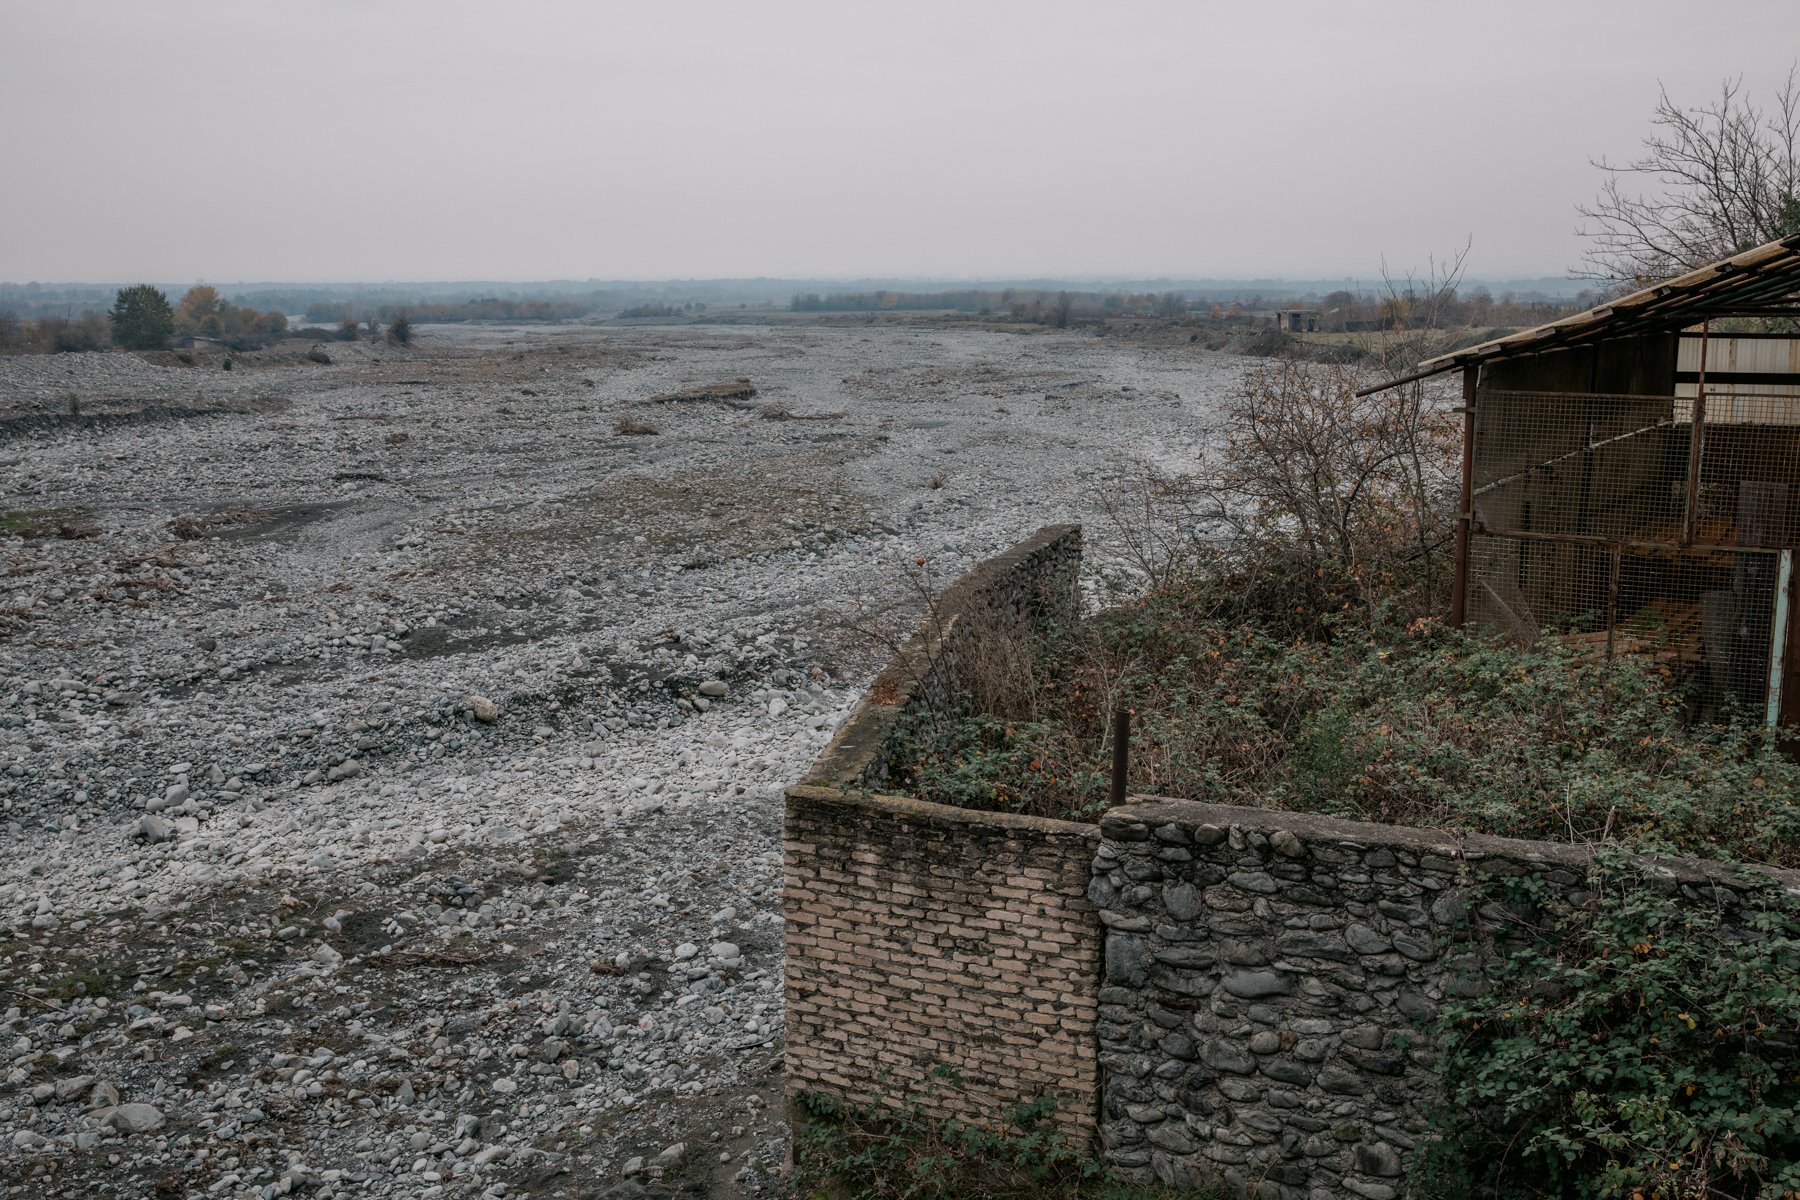  Many of the rivers that feed the Alazani, such as the Lagodekhiskhevi, dry up during the winter. In spring, as the snow begins to melt in the Caucasus Mountains, they come alive once again. 